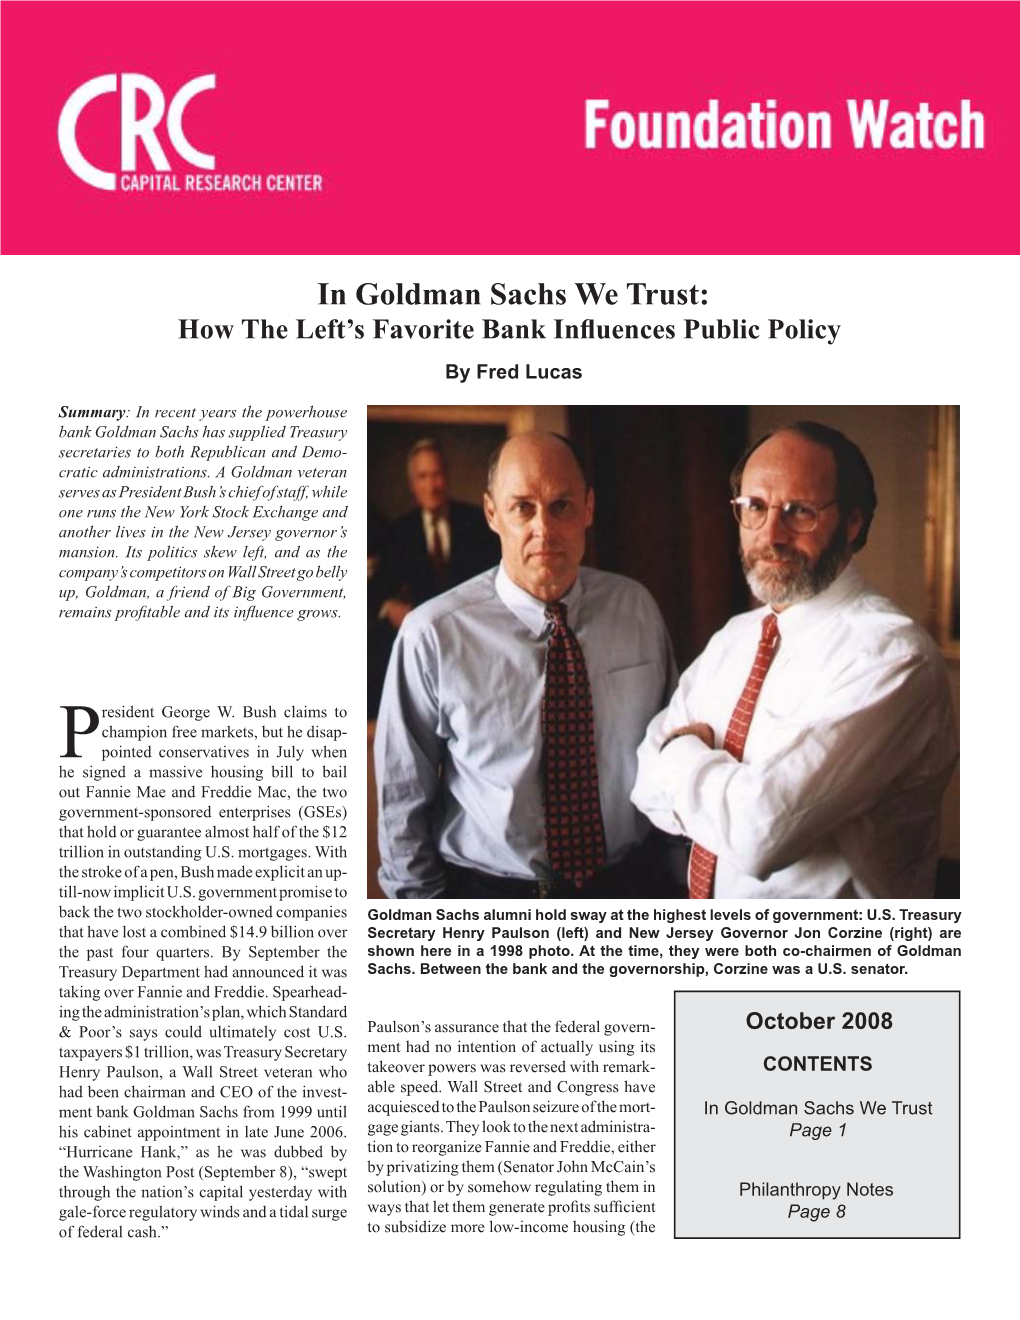 Goldman Sachs We Trust: How the Left’S Favorite Bank Inﬂ Uences Public Policy by Fred Lucas